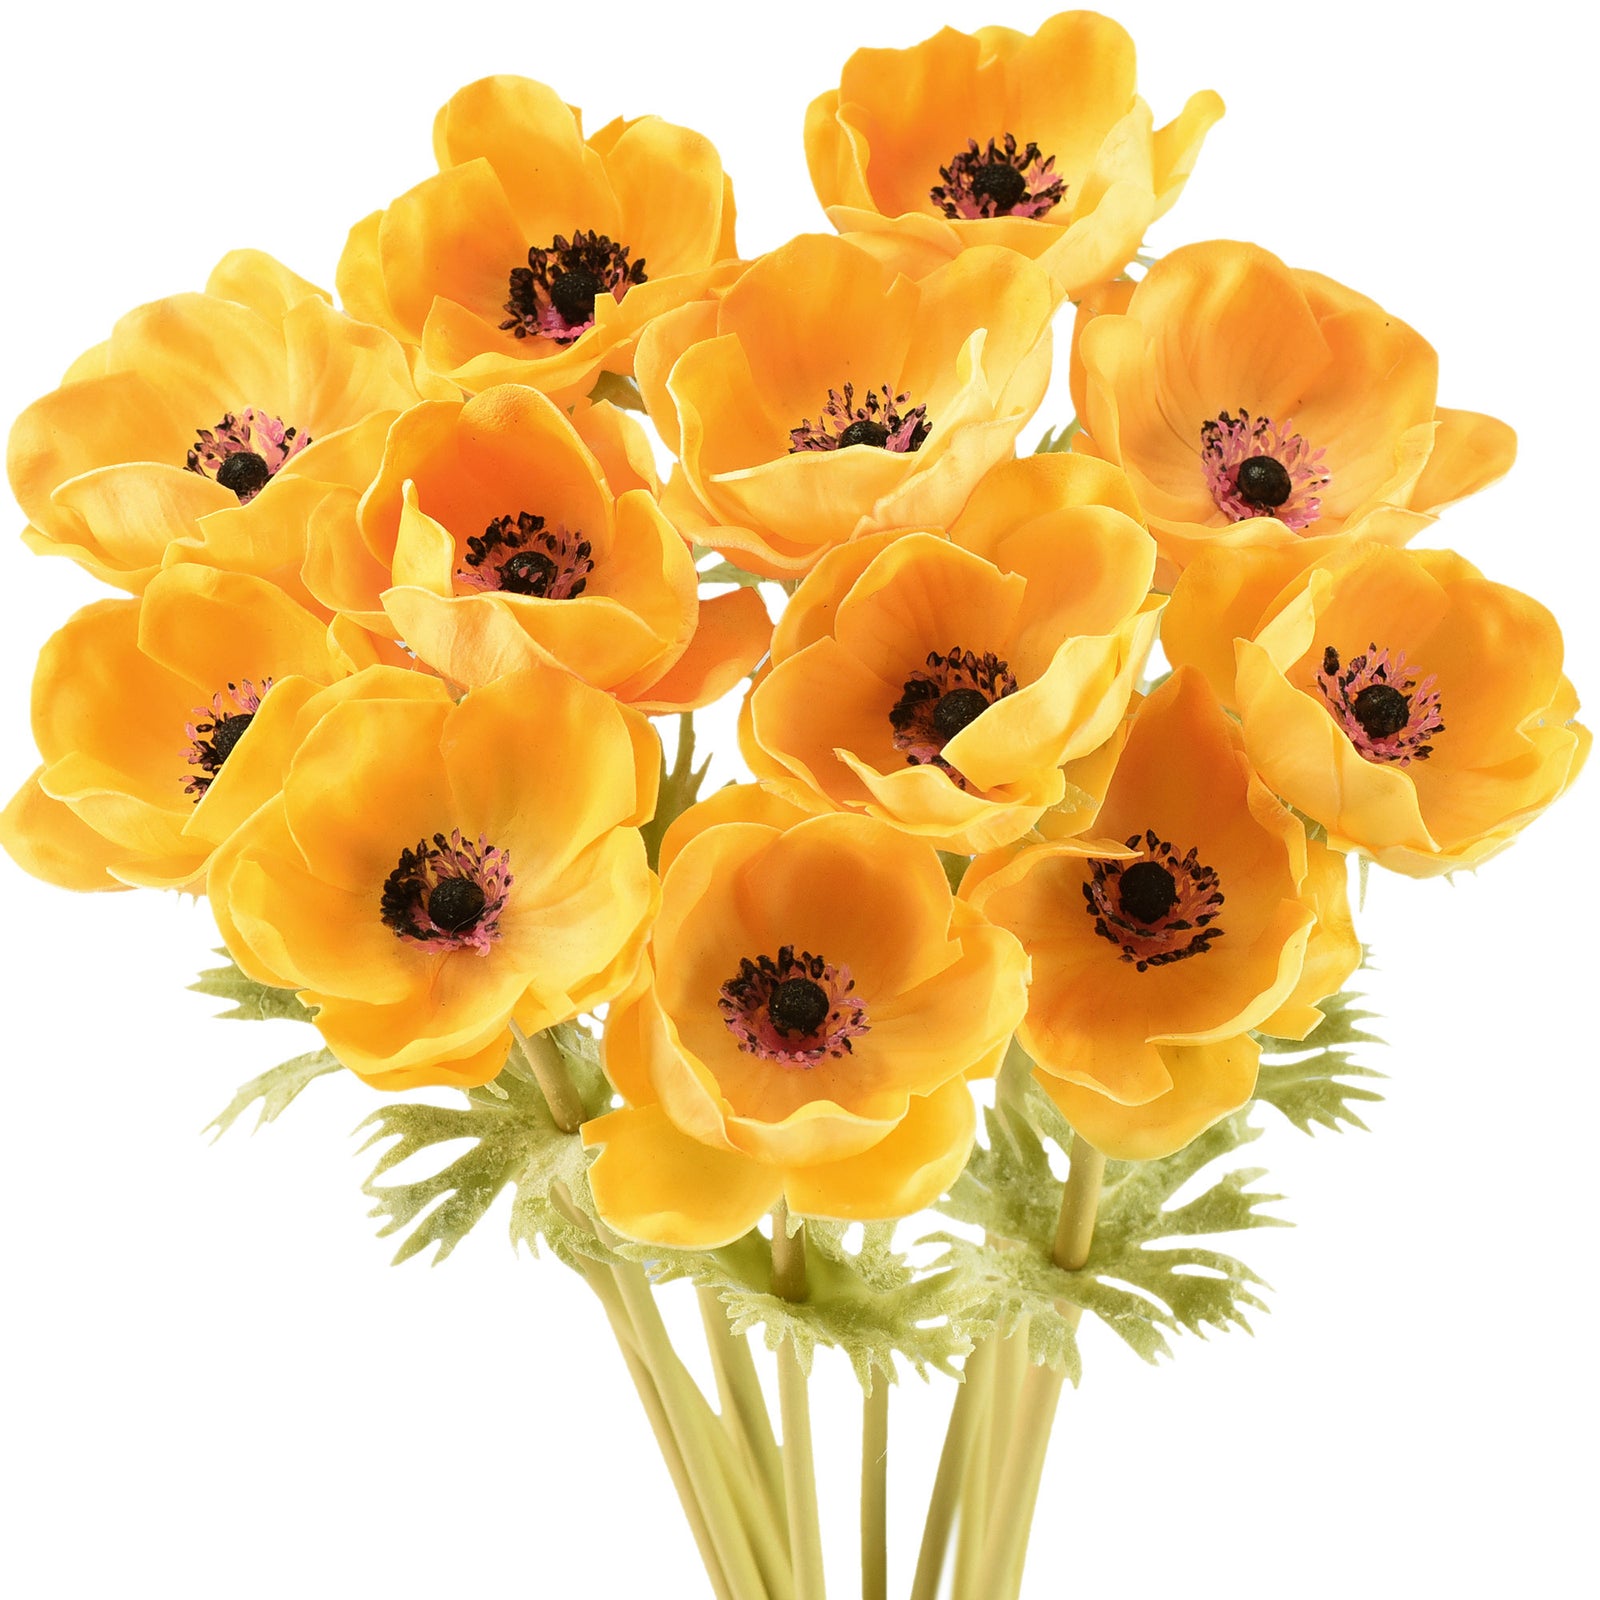 12 Long Stems of ‘Real Touch’ Artificial (Orange) Anemone Flowers, Wedding Bouquet Flower Arrangement, 45cm (17.7 inches)